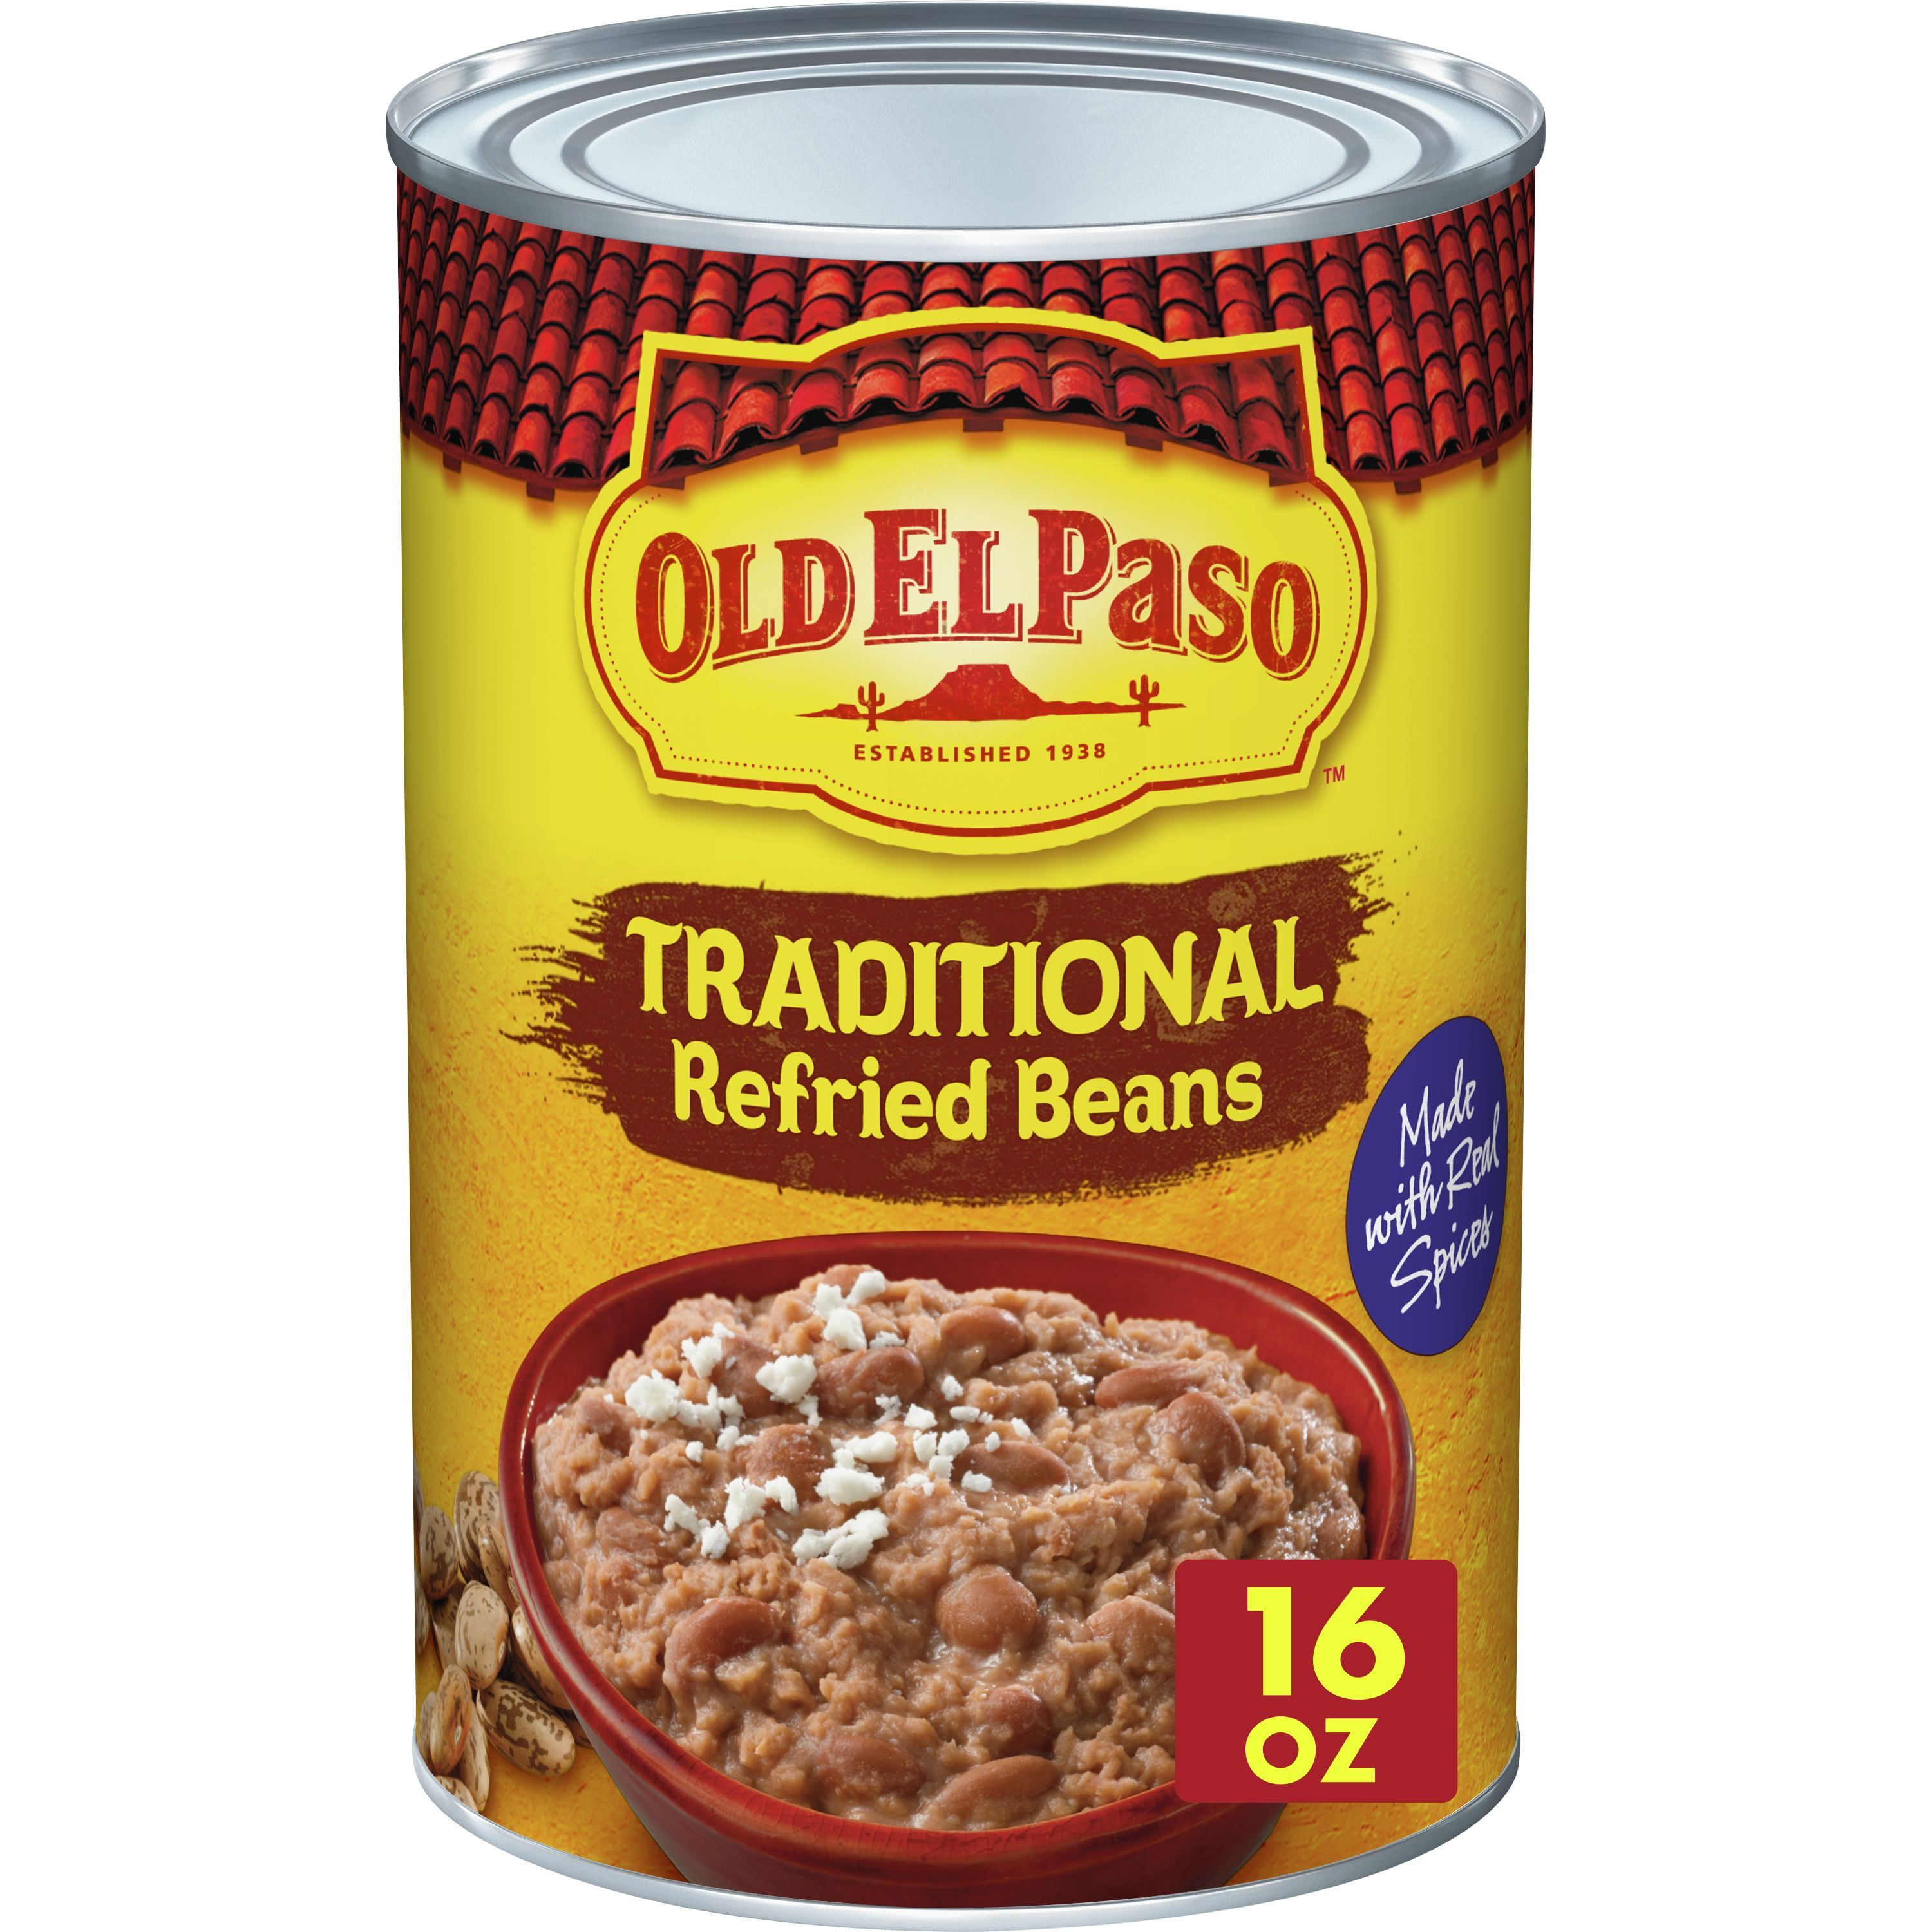 Old El Paso Traditional Refried Beans, 16 oz.